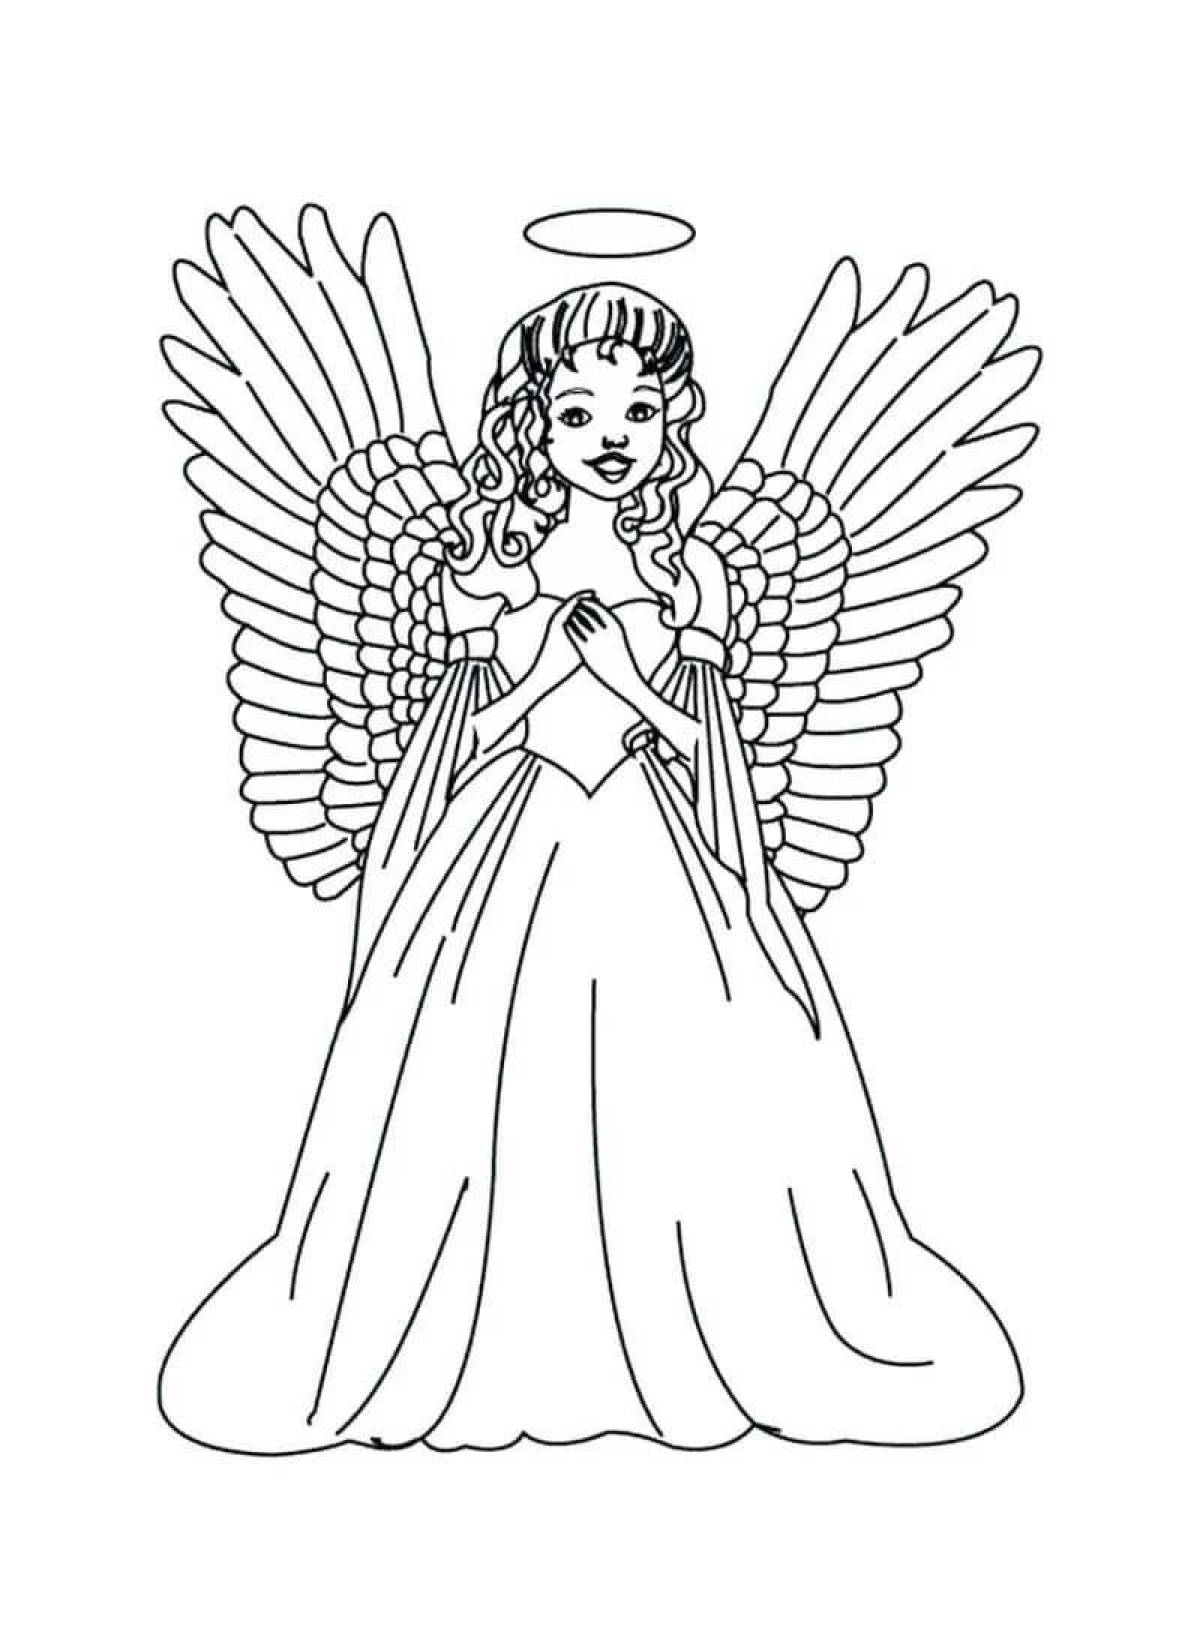 Coloring angel with heavenly guidance